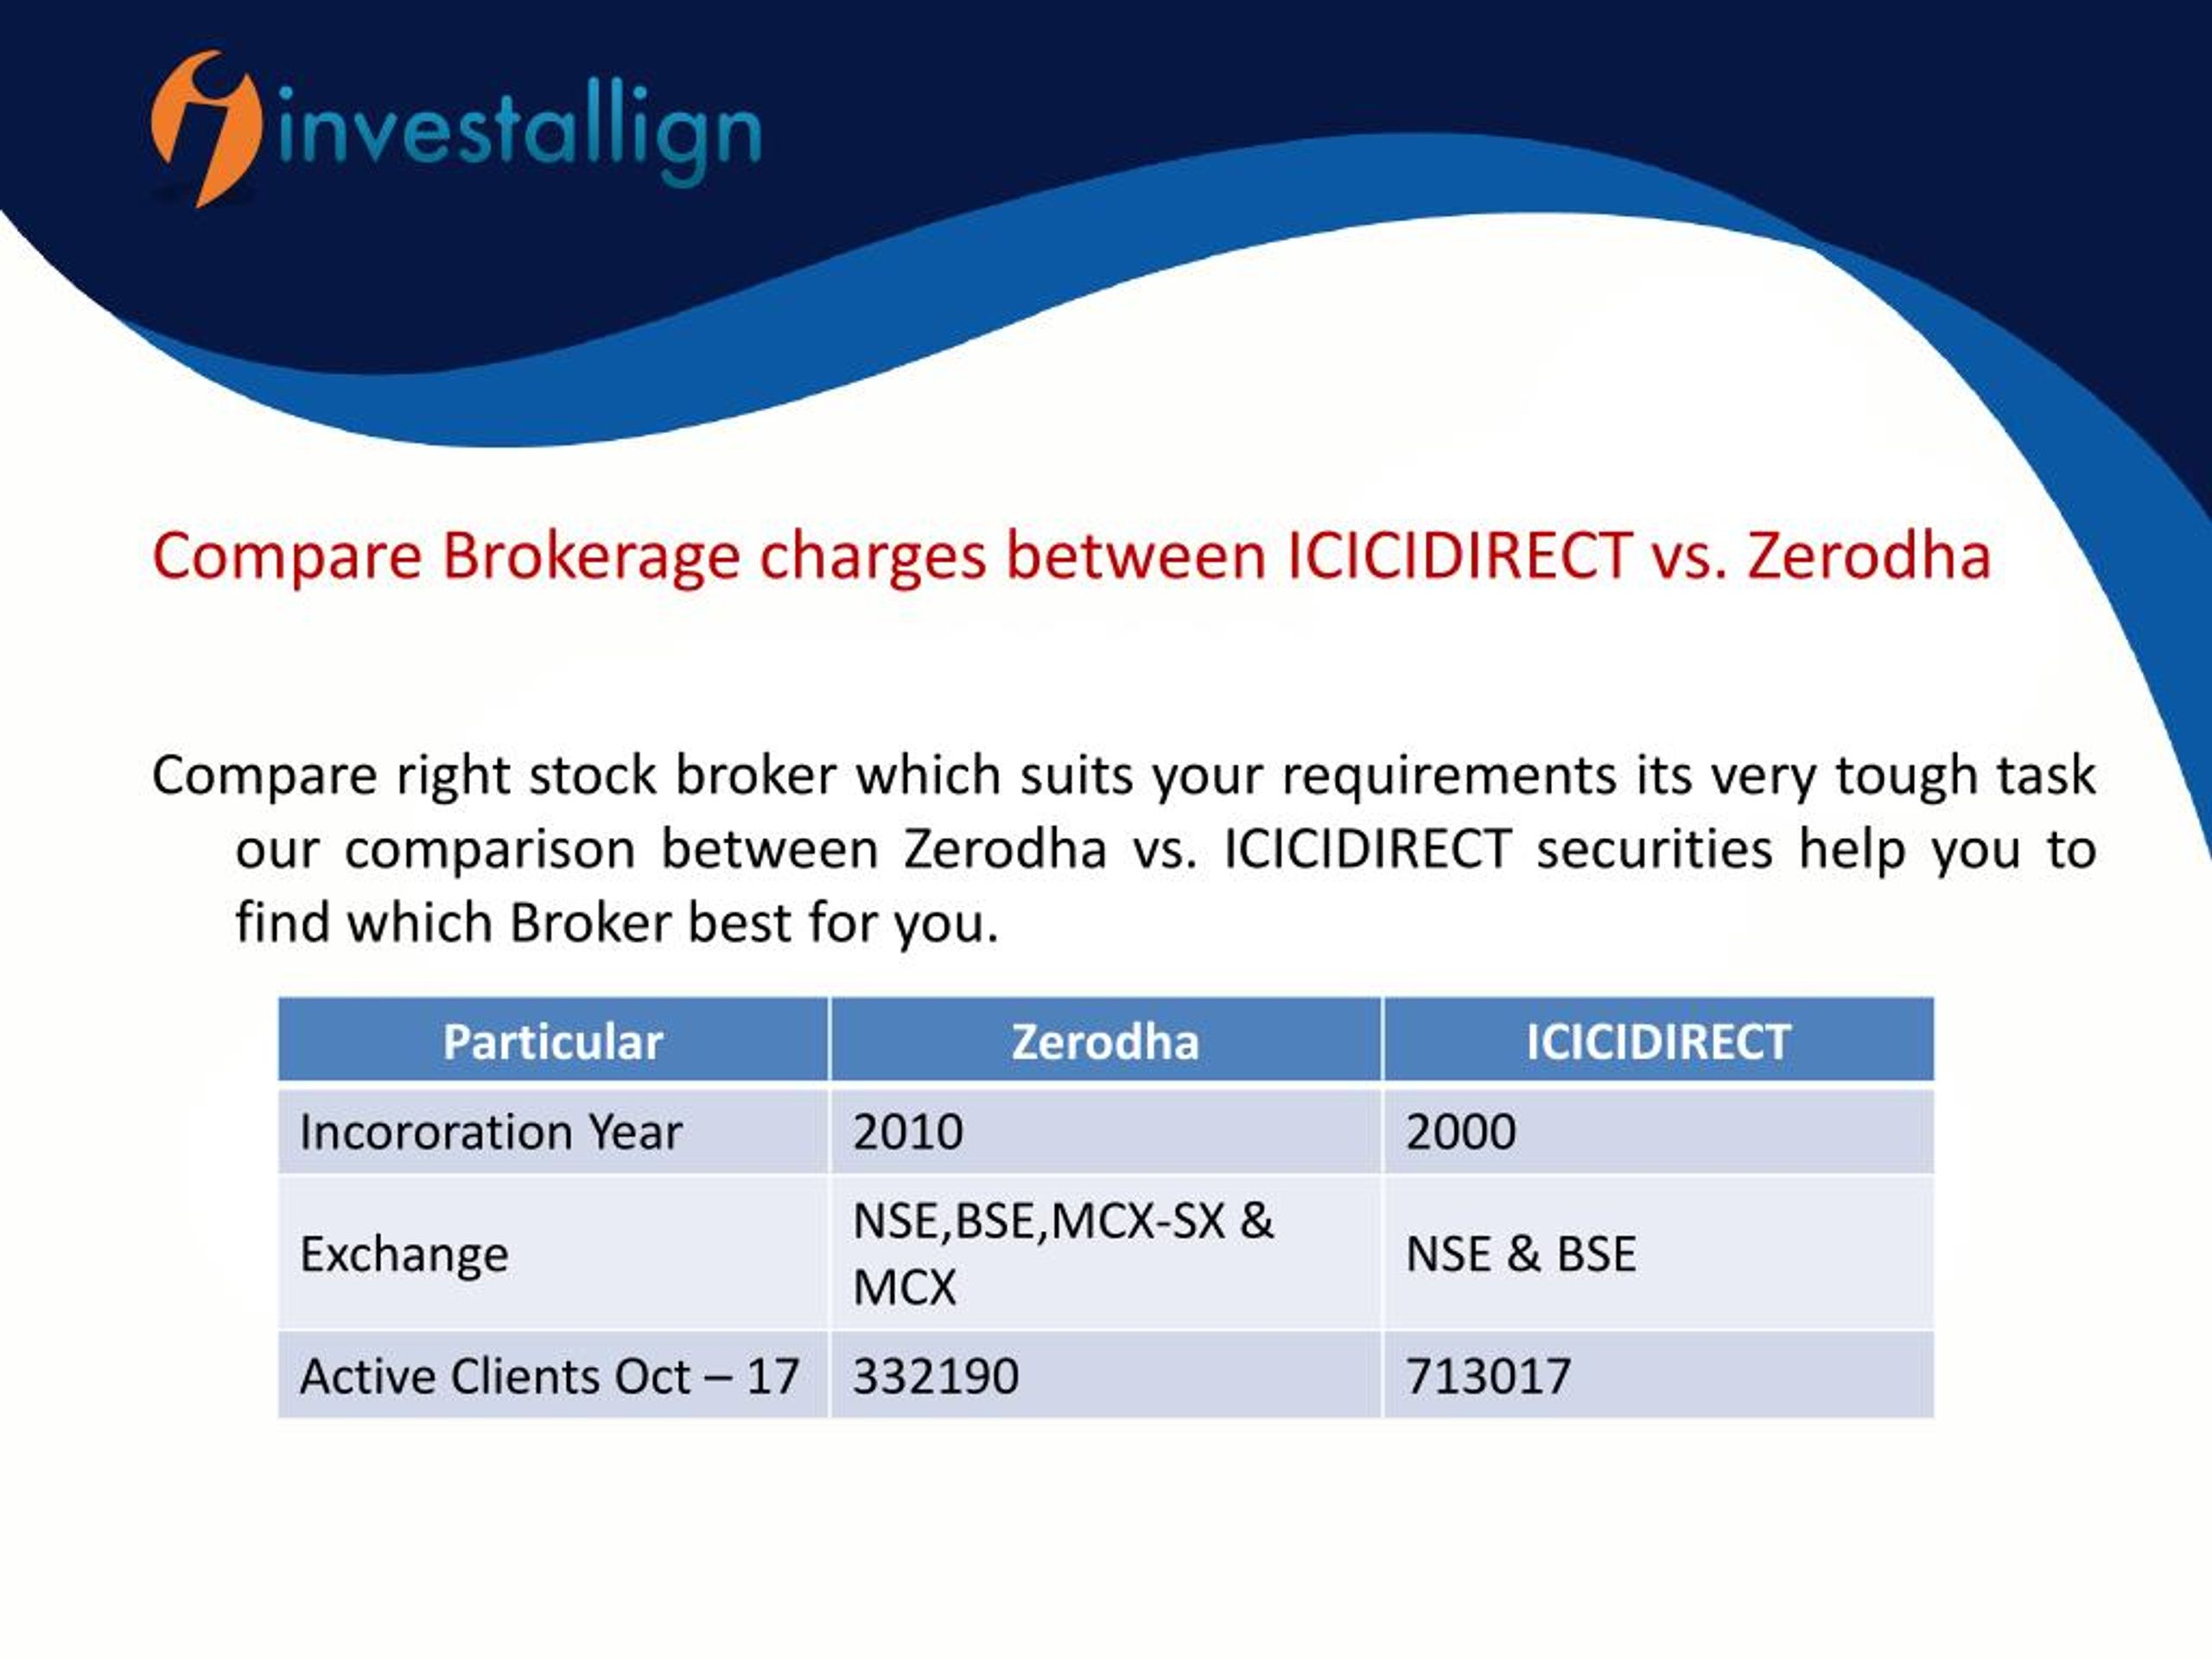 Ppt Compare Zerodha Vs Icicidirect Brokerage Charges Powerpoint Presentation Id7821942 6636